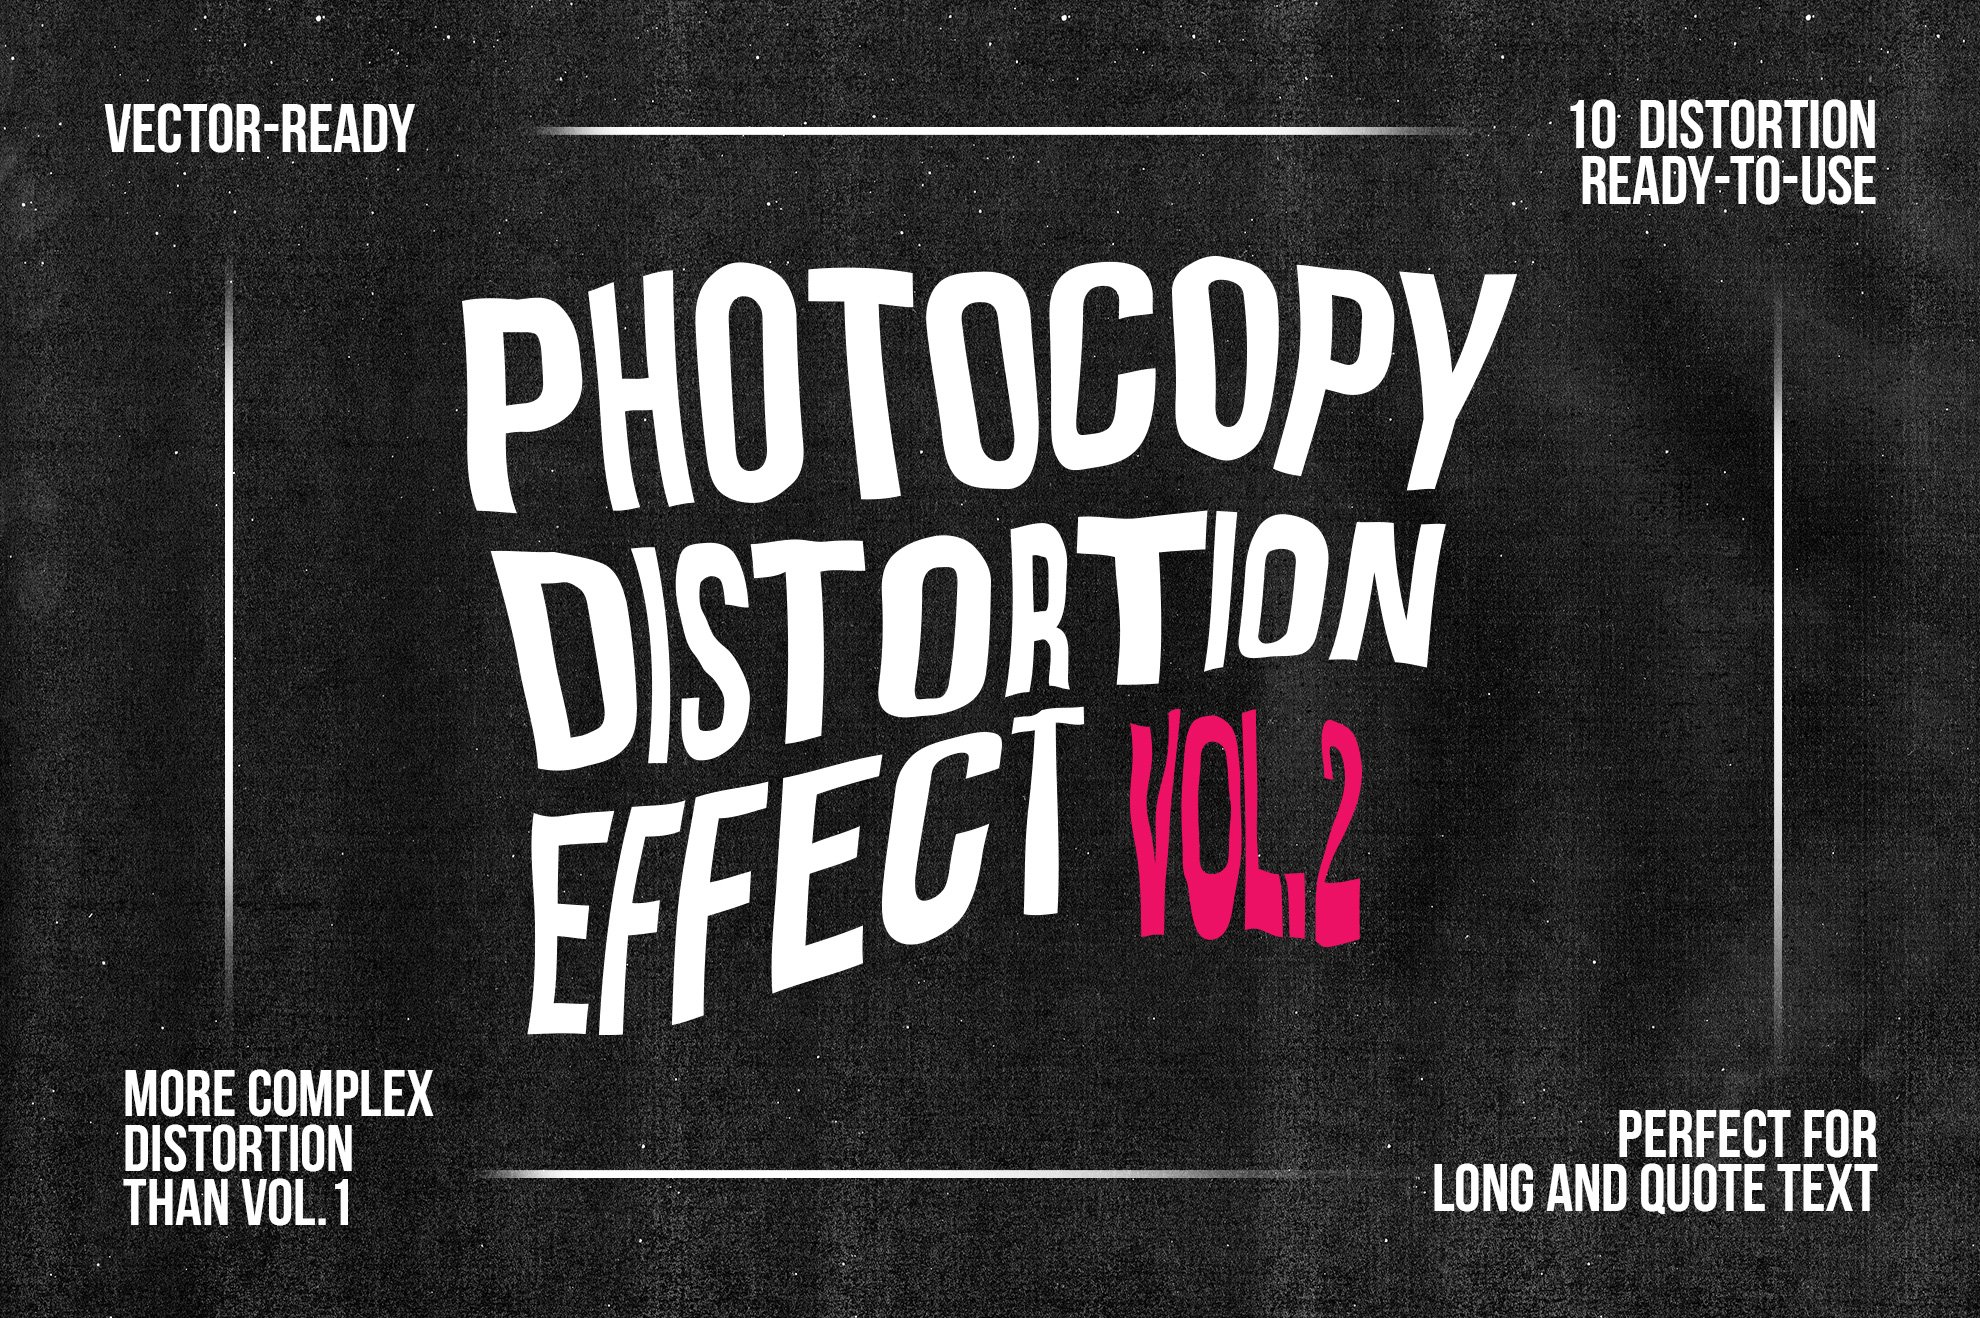 Photocopy Distortion Effect - vol. 2cover image.